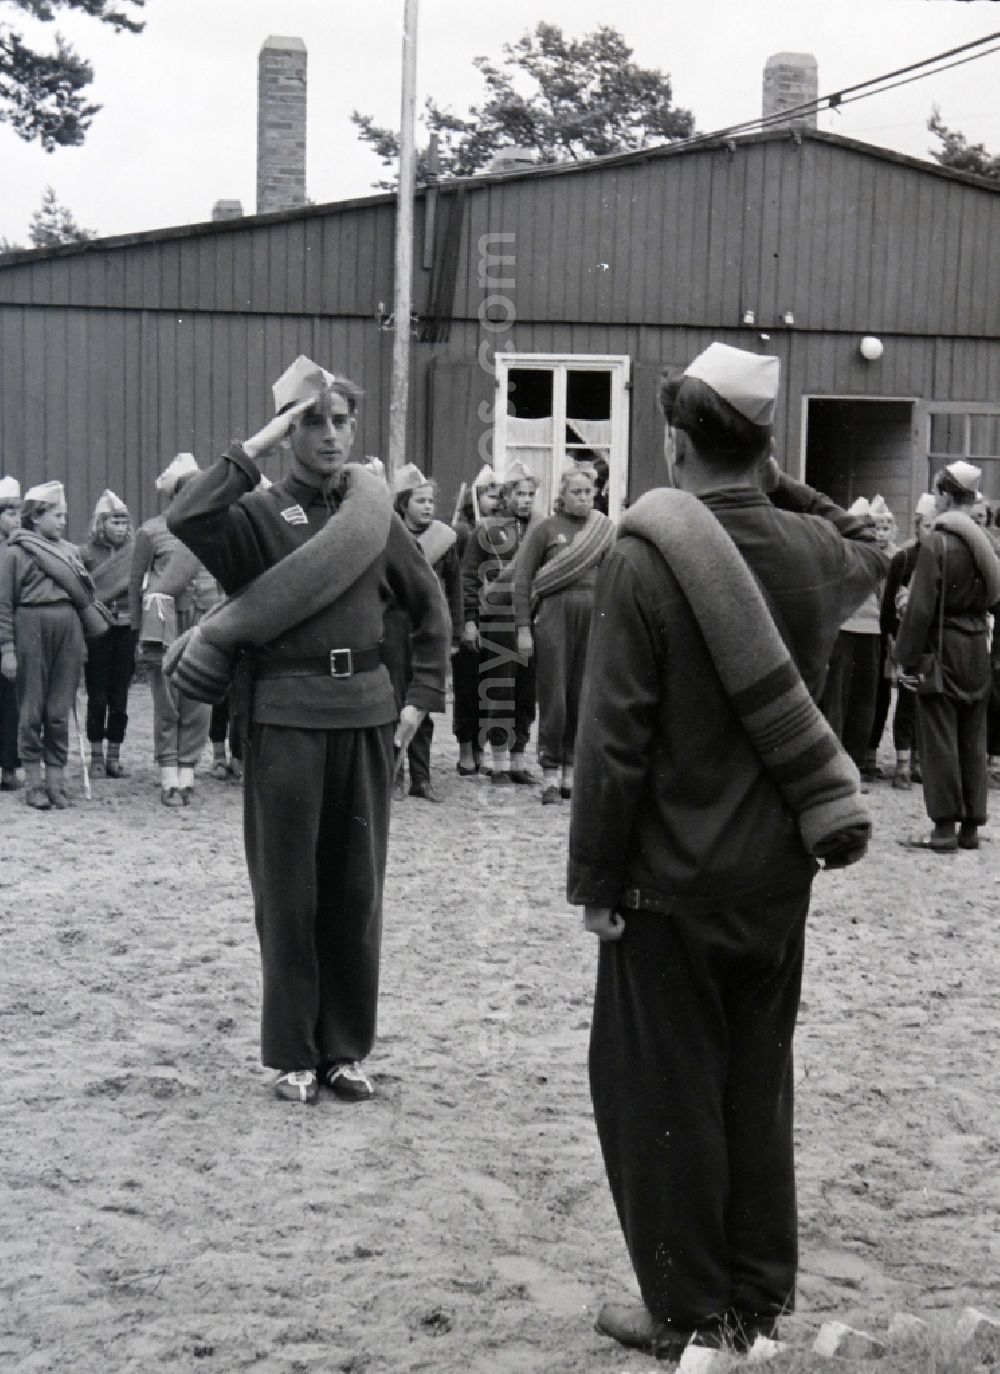 Prerow: Summer camp operation with pupils and teenagers in the summer camp Kim Ir Sen of the pioneer organization Ernst Thaelmann in Prerow in the state Mecklenburg-Western Pomerania on the territory of the former GDR, German Democratic Republic. With homemade phantasy uniforms and pre-military drill and ante-exercises, the communist tradition was commemorated in the Spanish Civil War